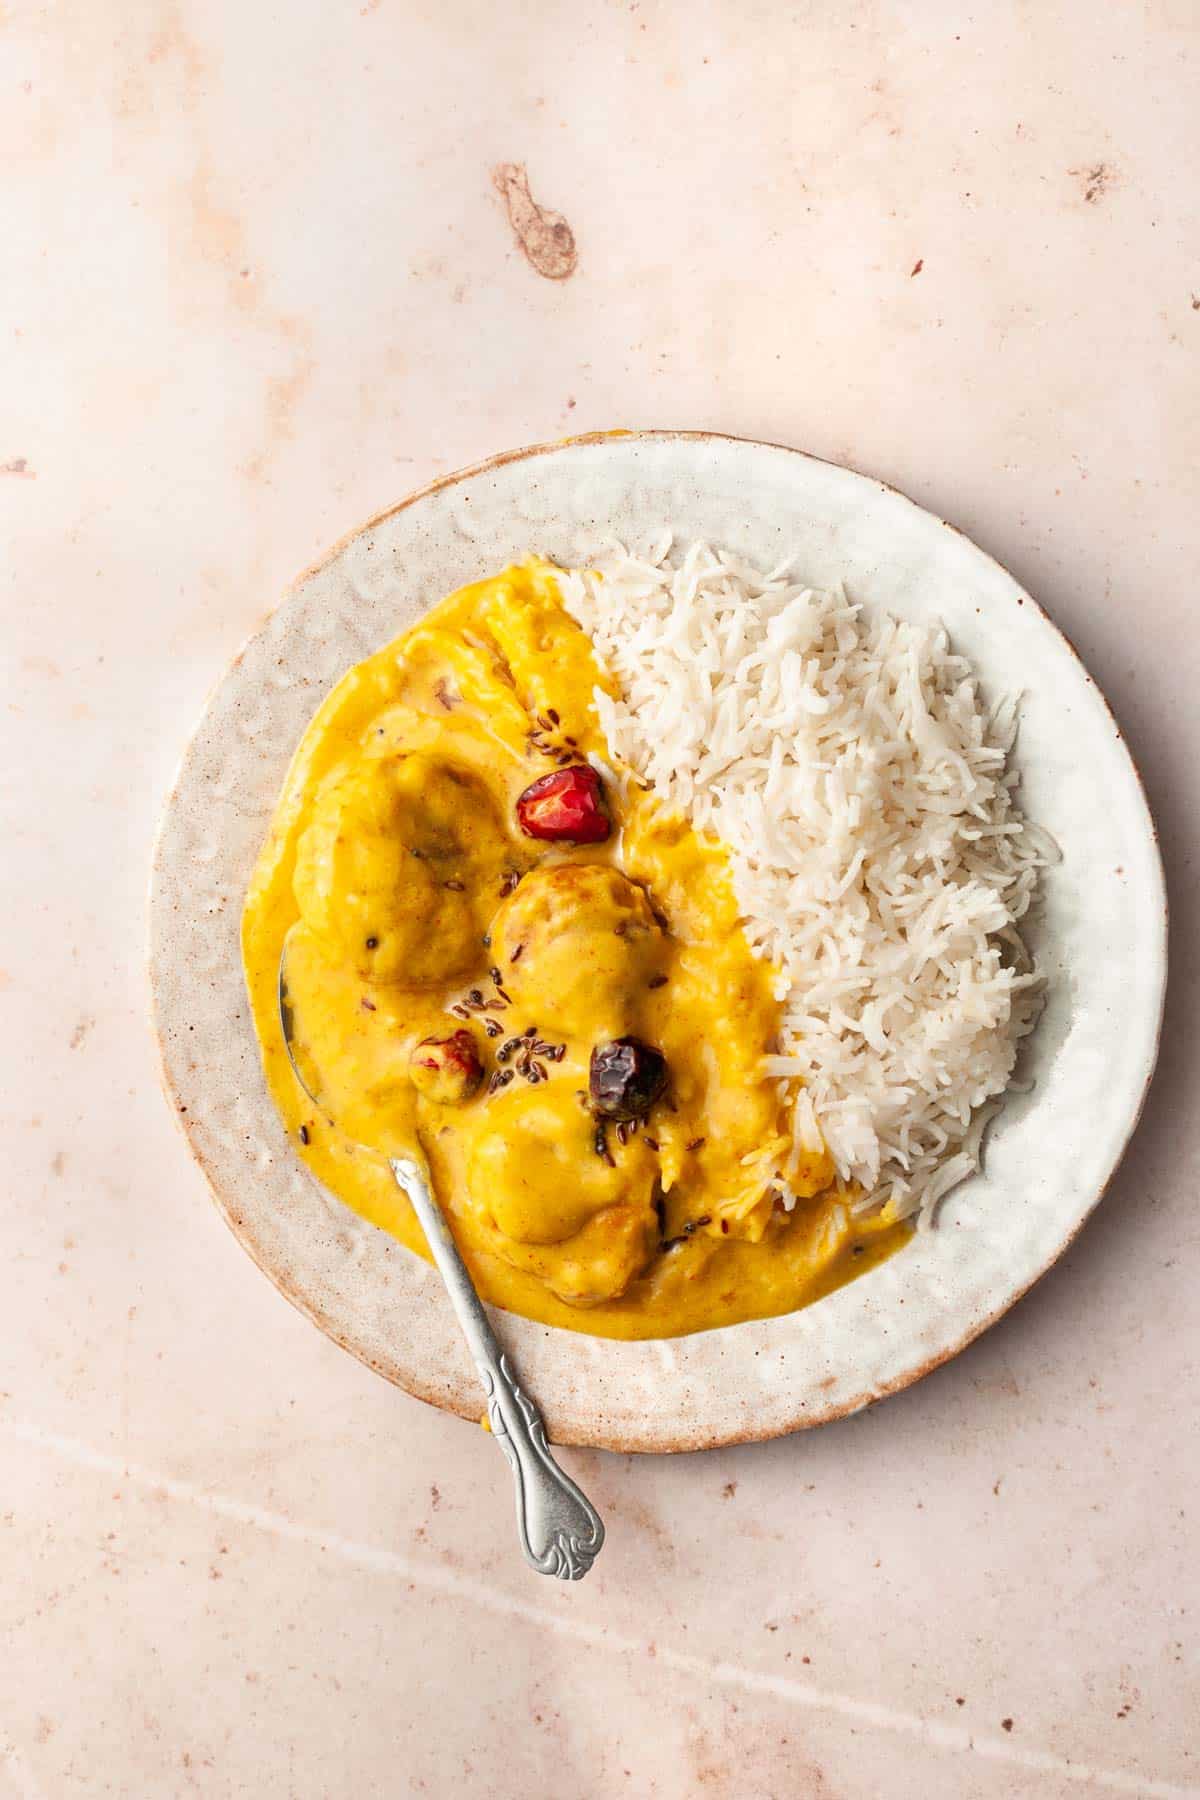 Kadhi over rice in a plate.